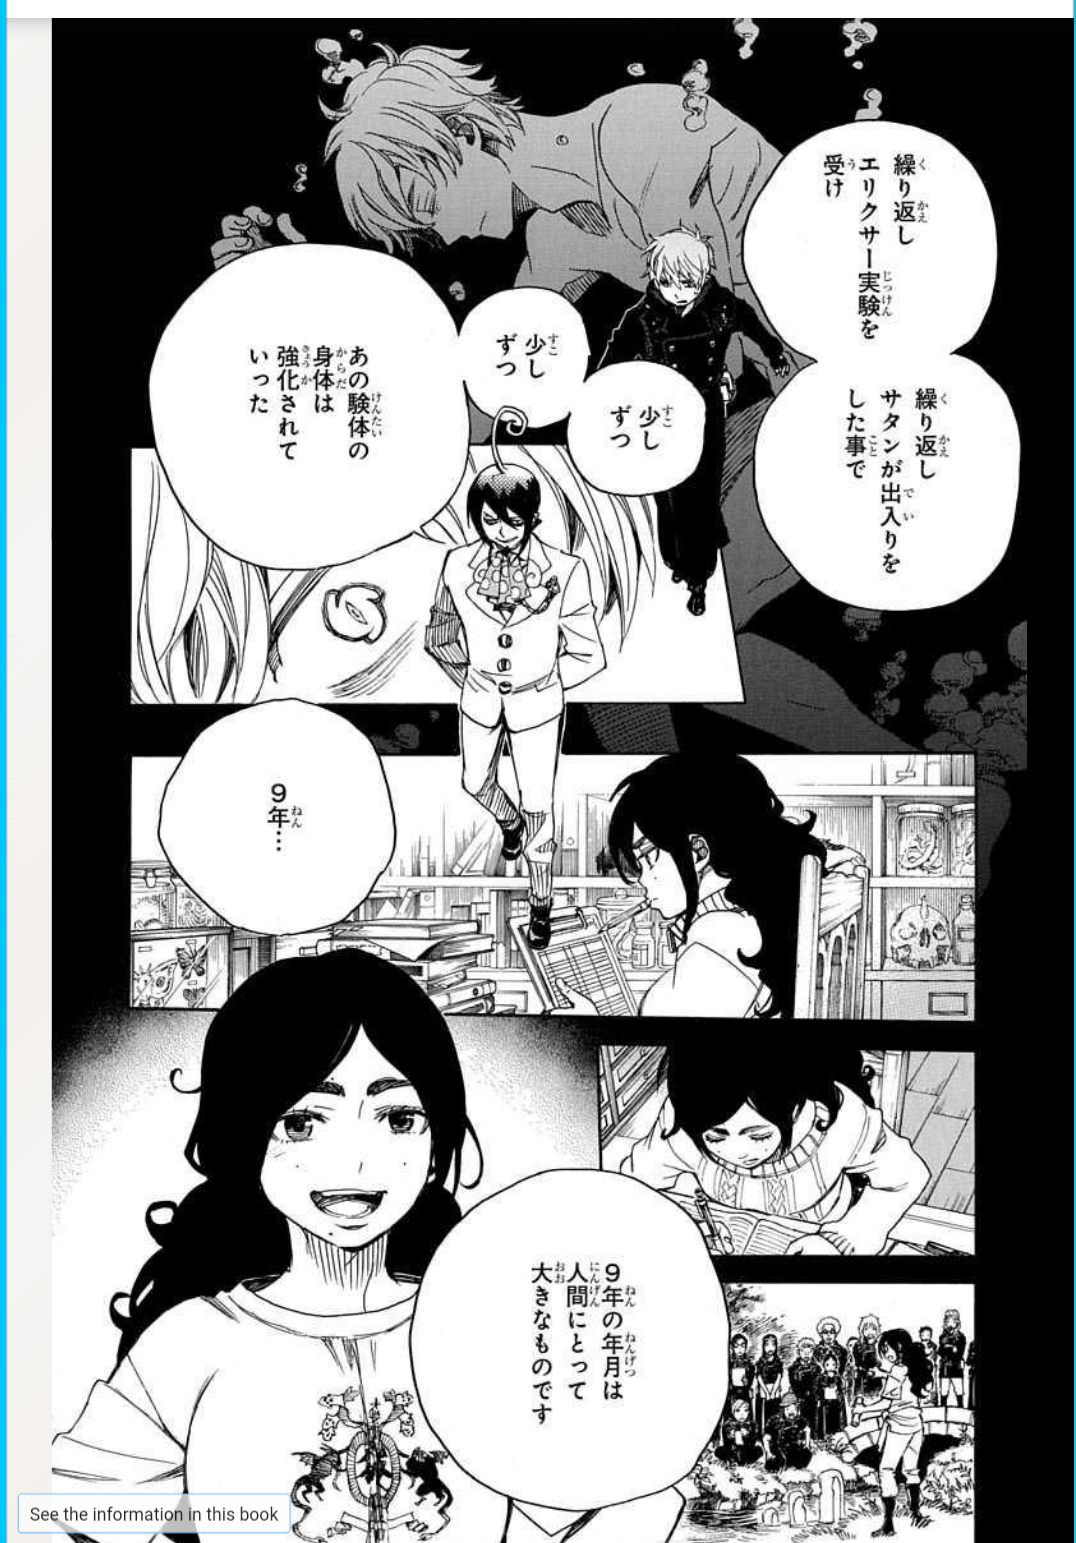 Ao No Exorcist Volume 23 Chapter 104 Preview